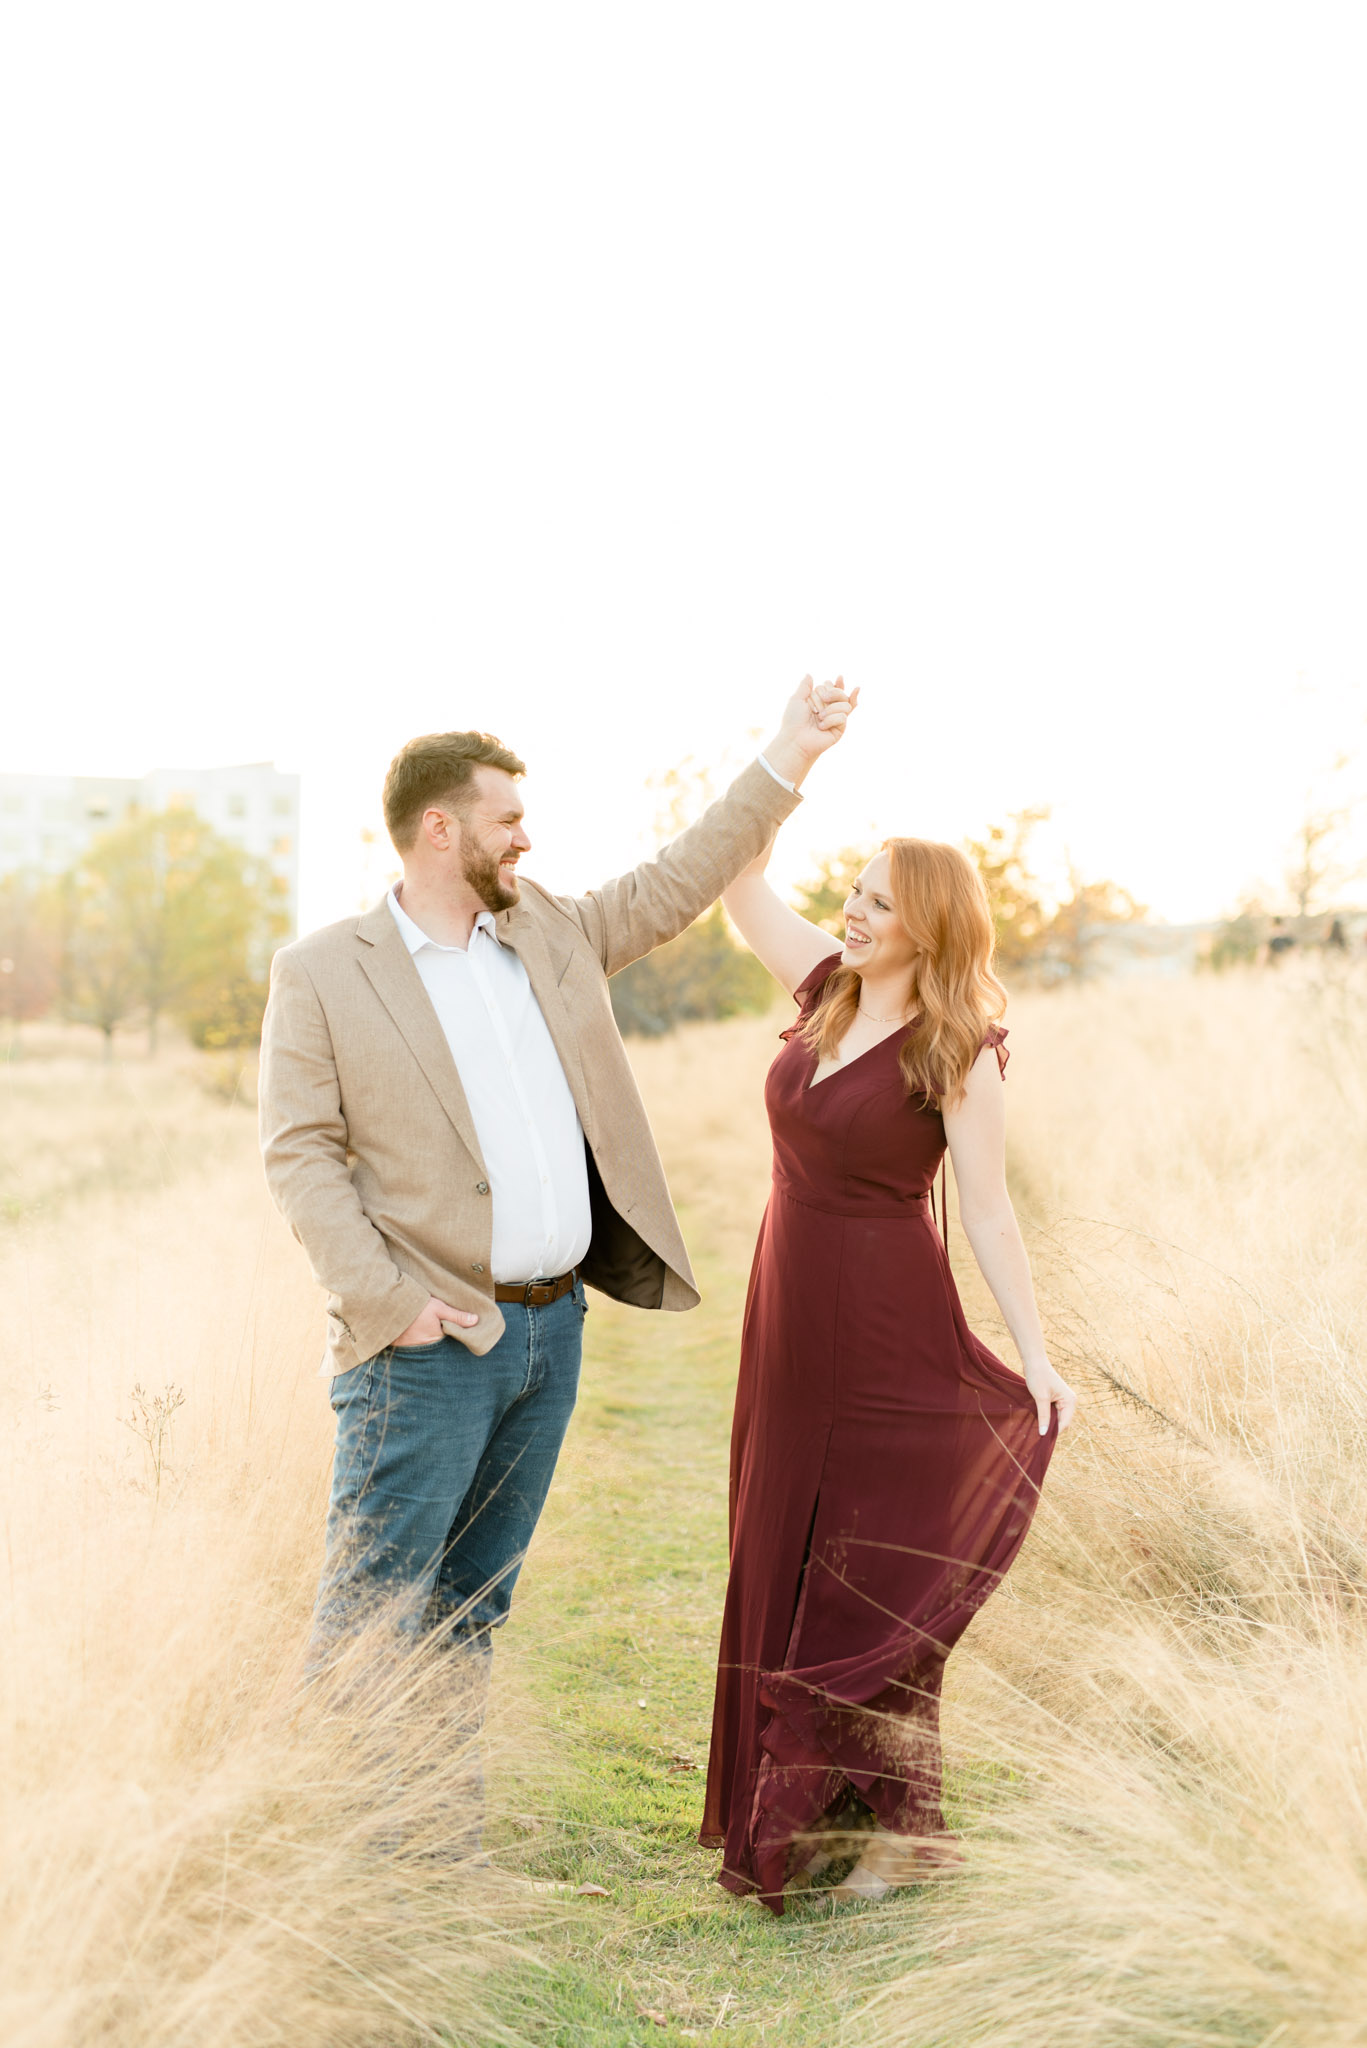 Married couple dances in sunset field.